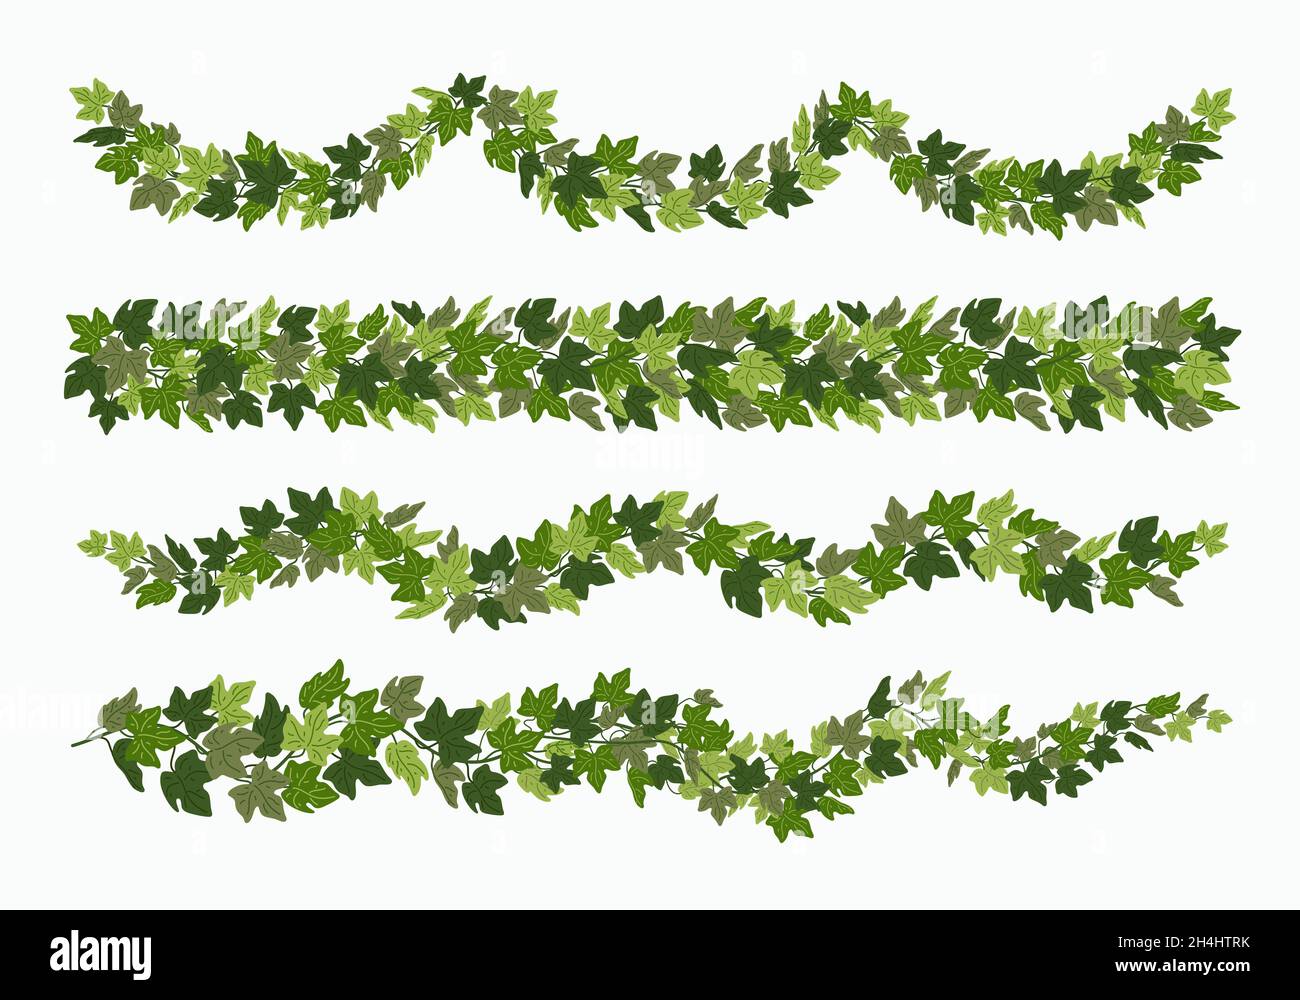 Ivy festoons and borders, green creeper decorative dividers isolated on white background. Vector illustration in flat cartoon style. Stock Vector